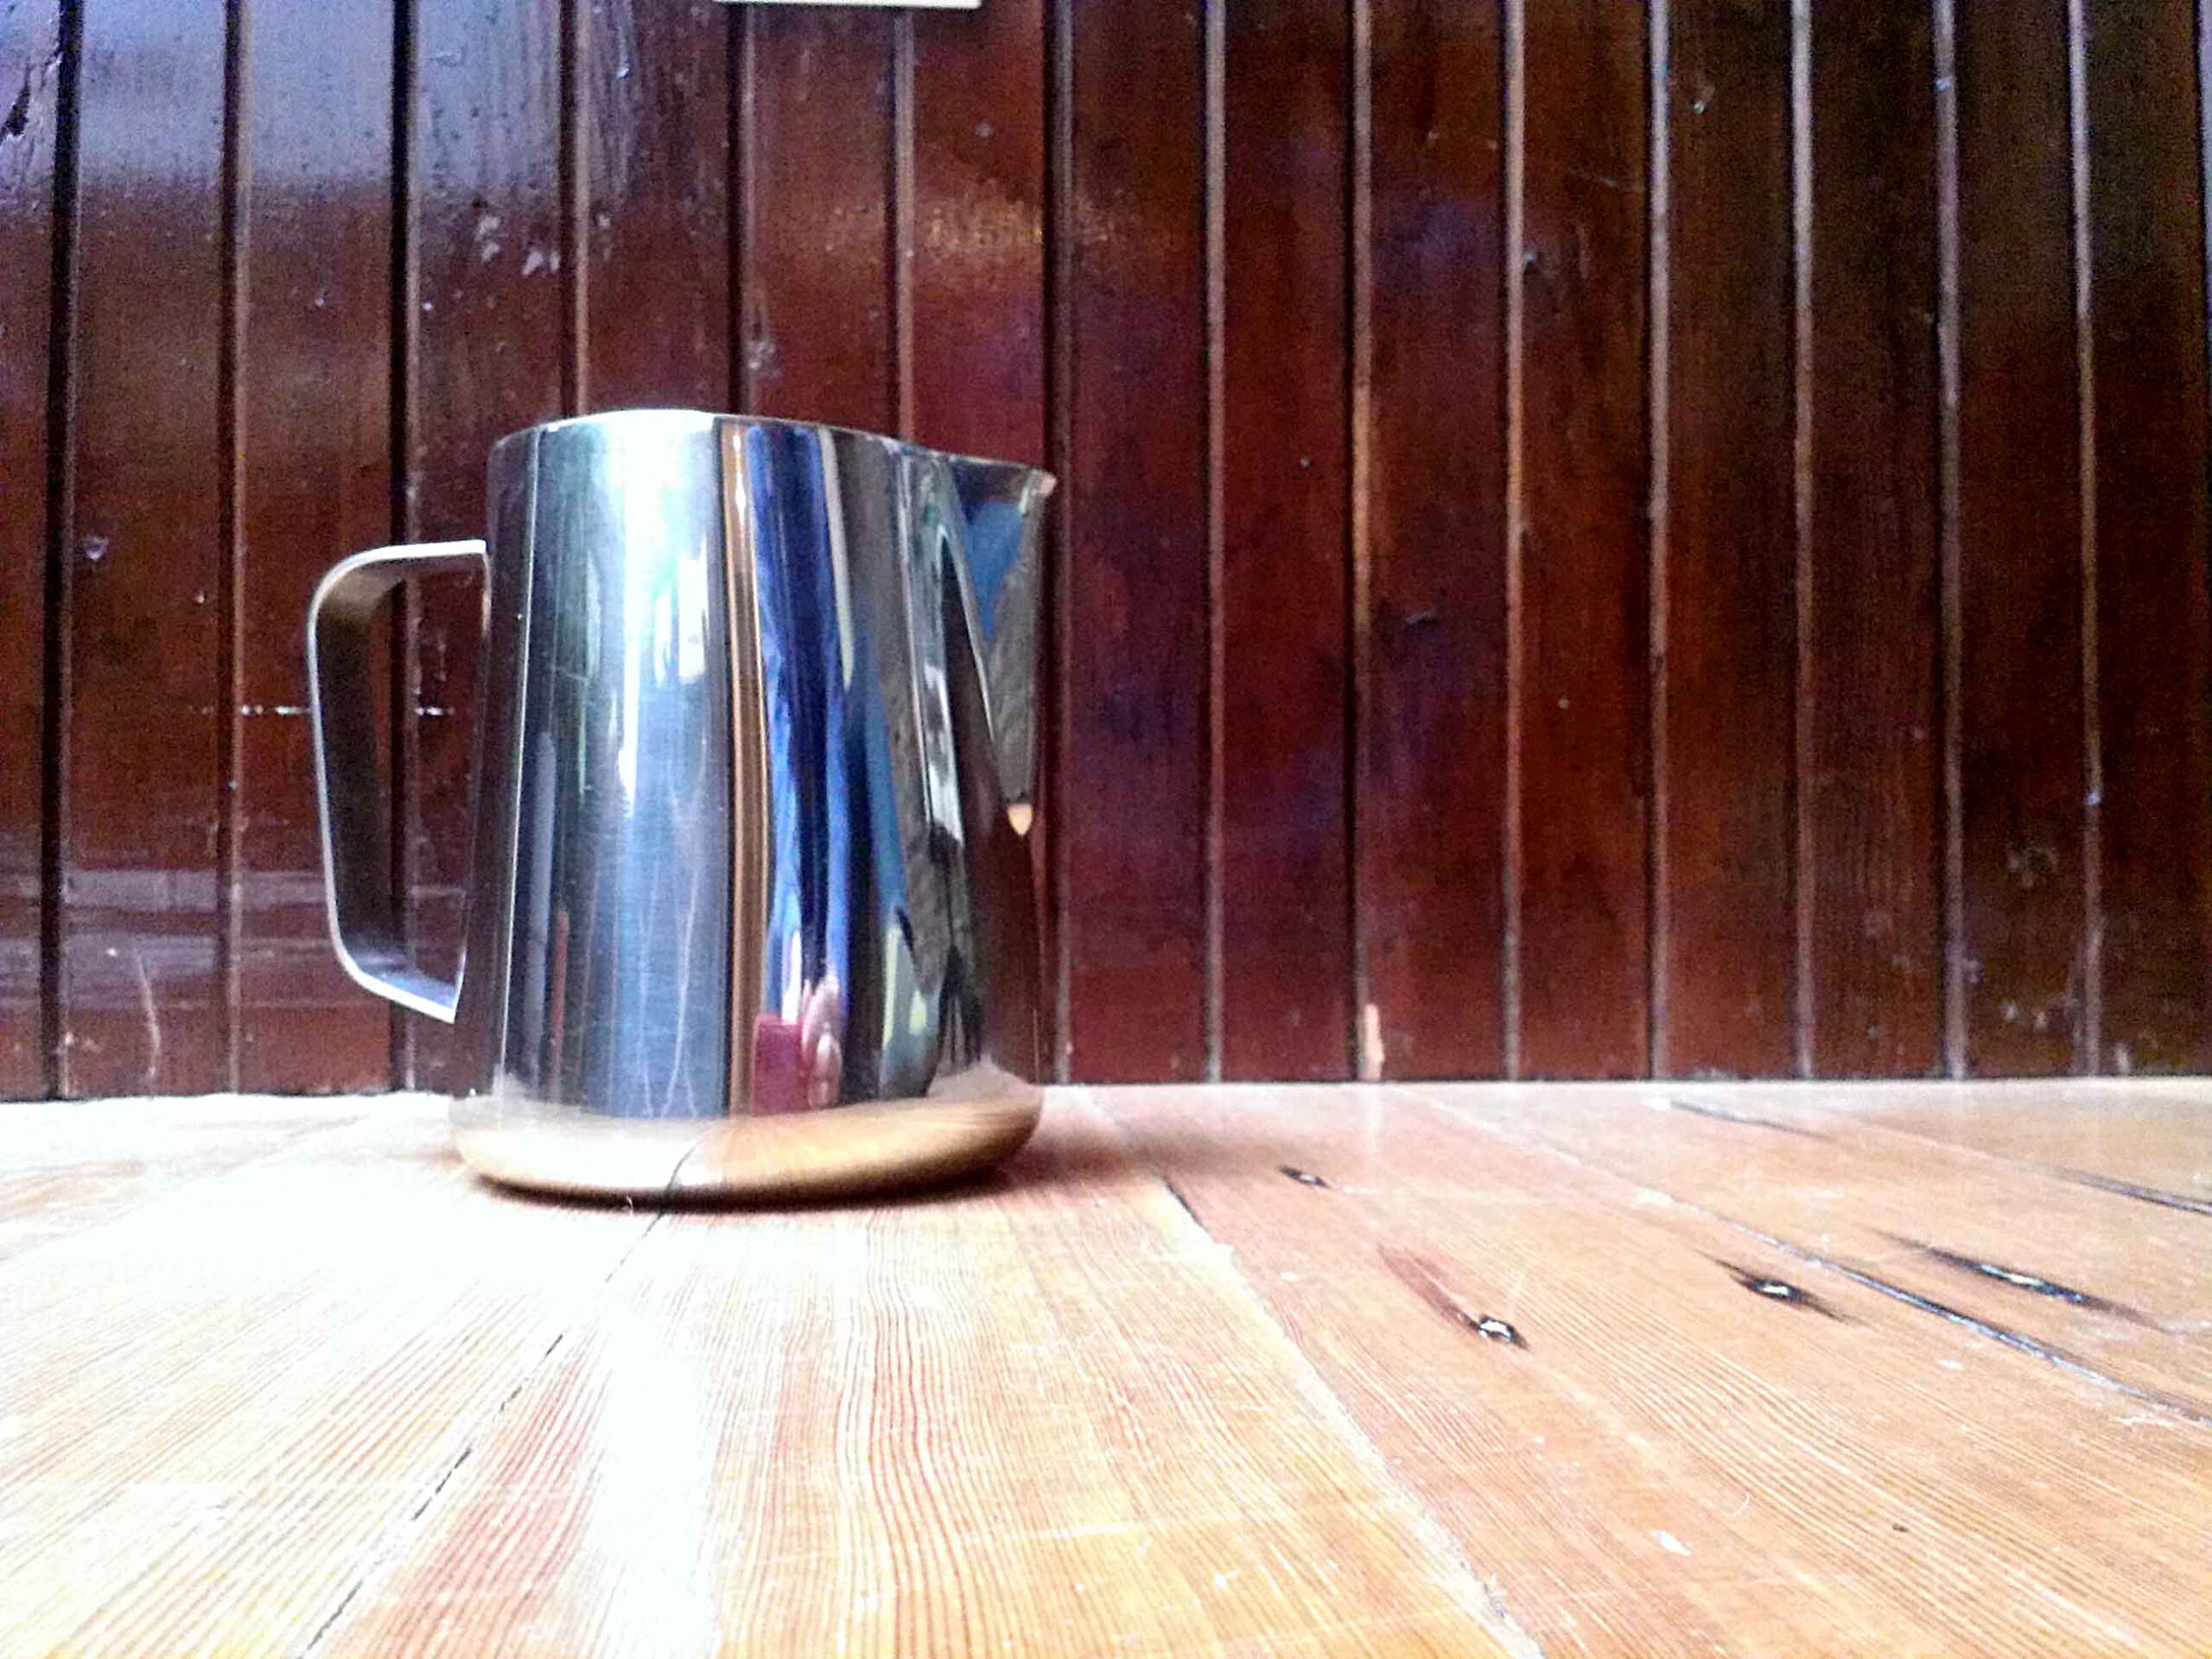 Coated Frothing Pitcher, Powder Coated Milk Pitcher